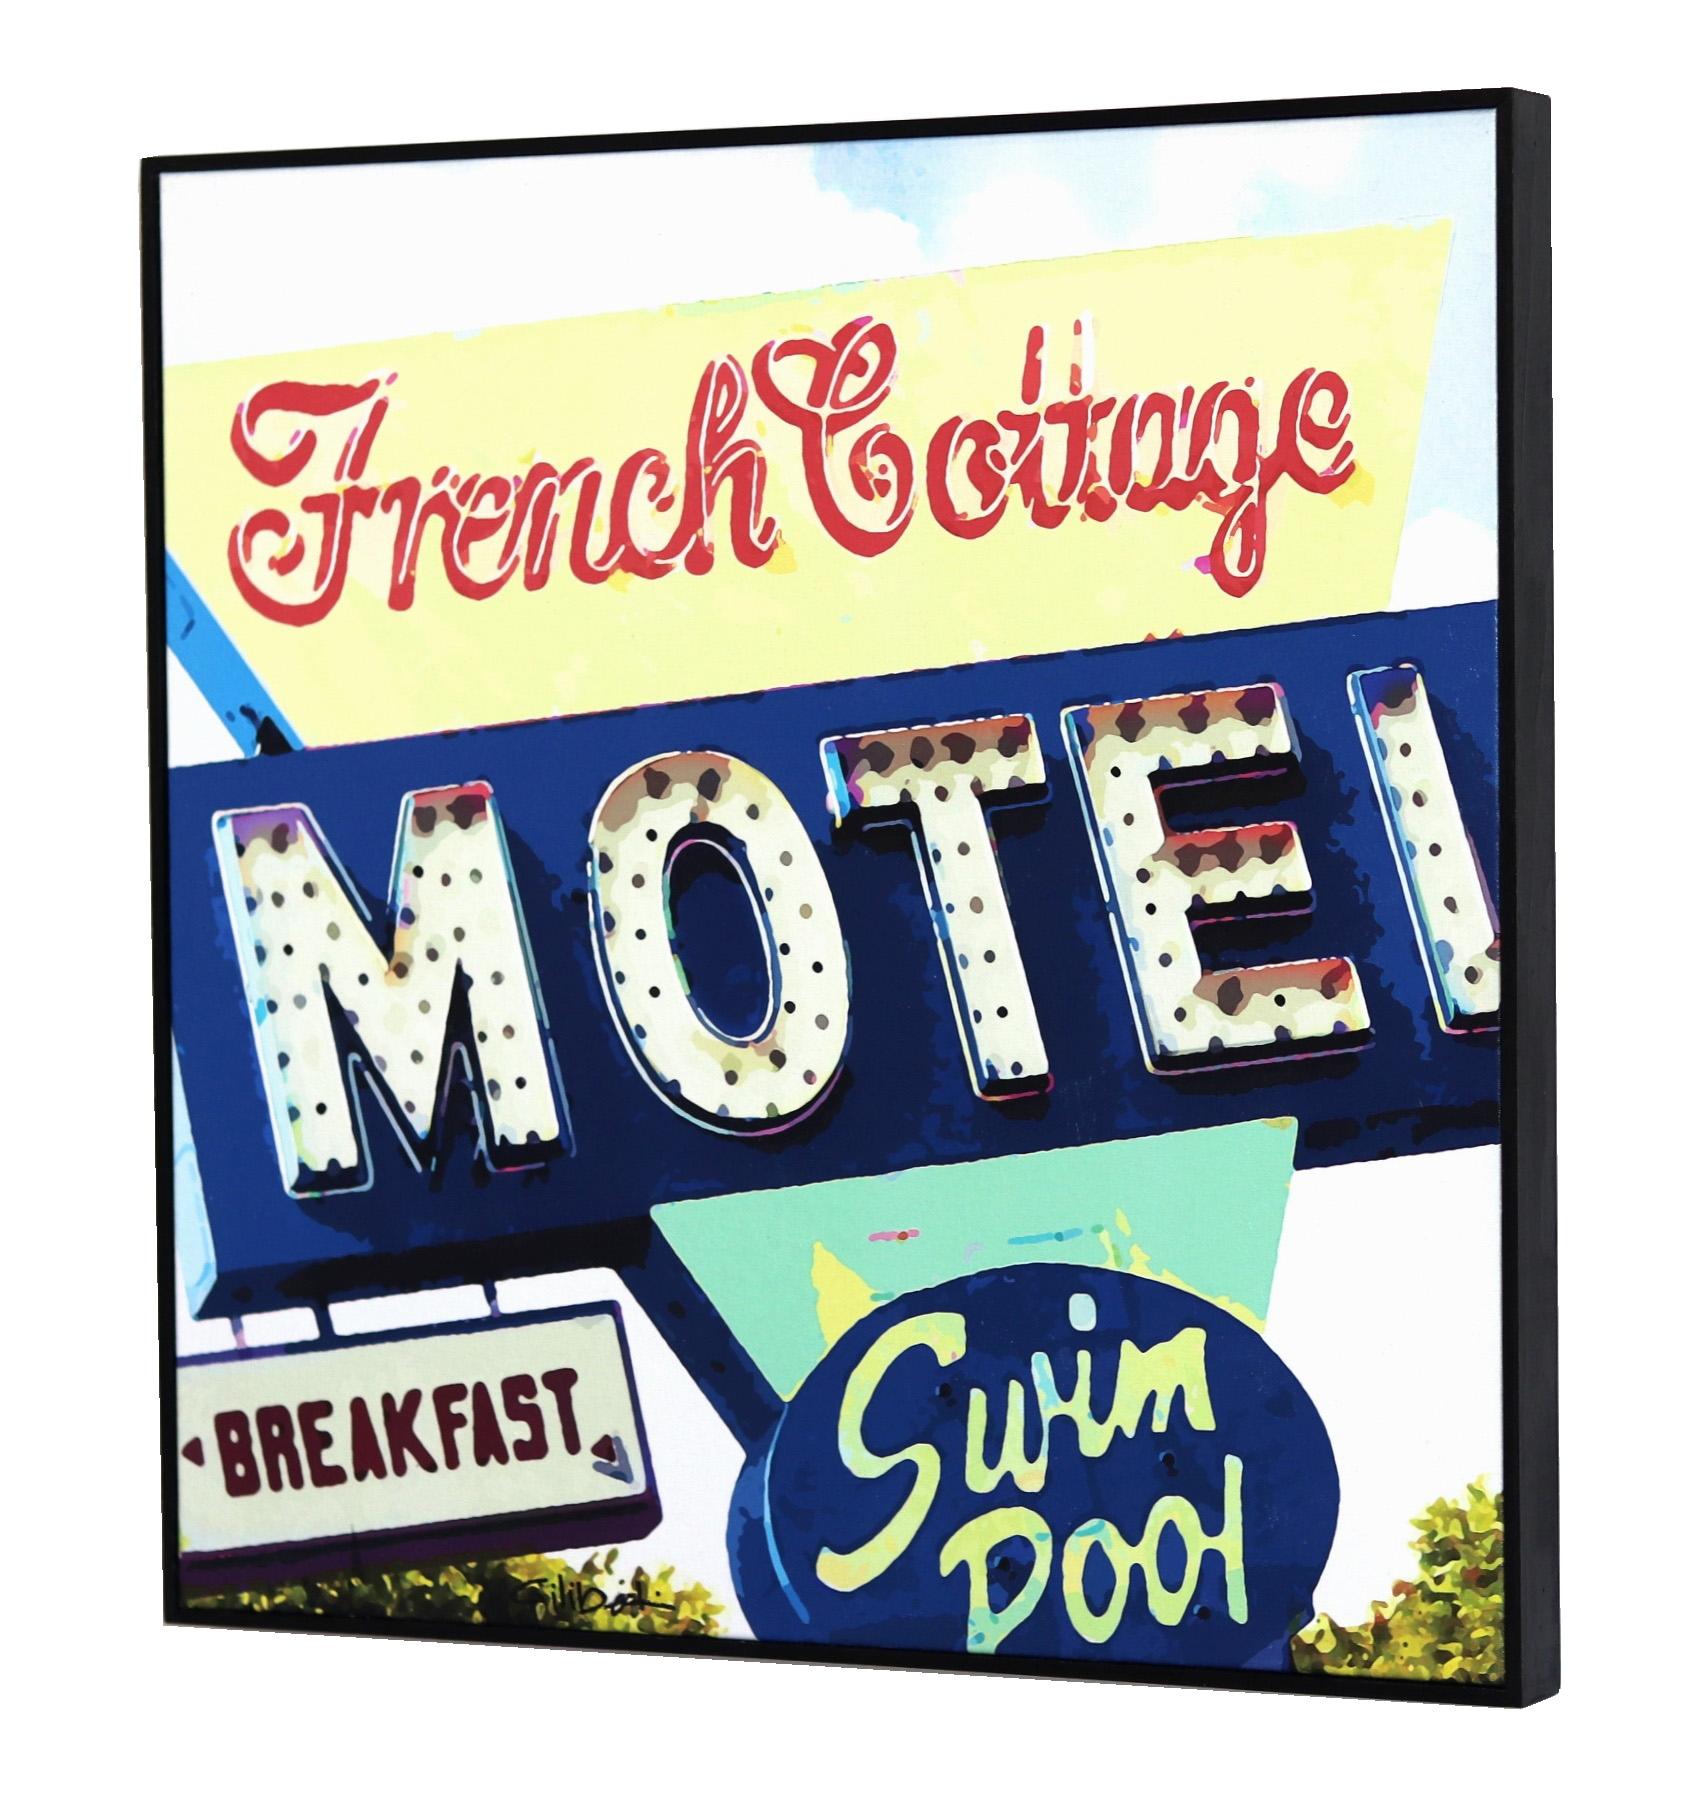 French Cottage Motel - Beige Landscape Painting by Michael Giliberti